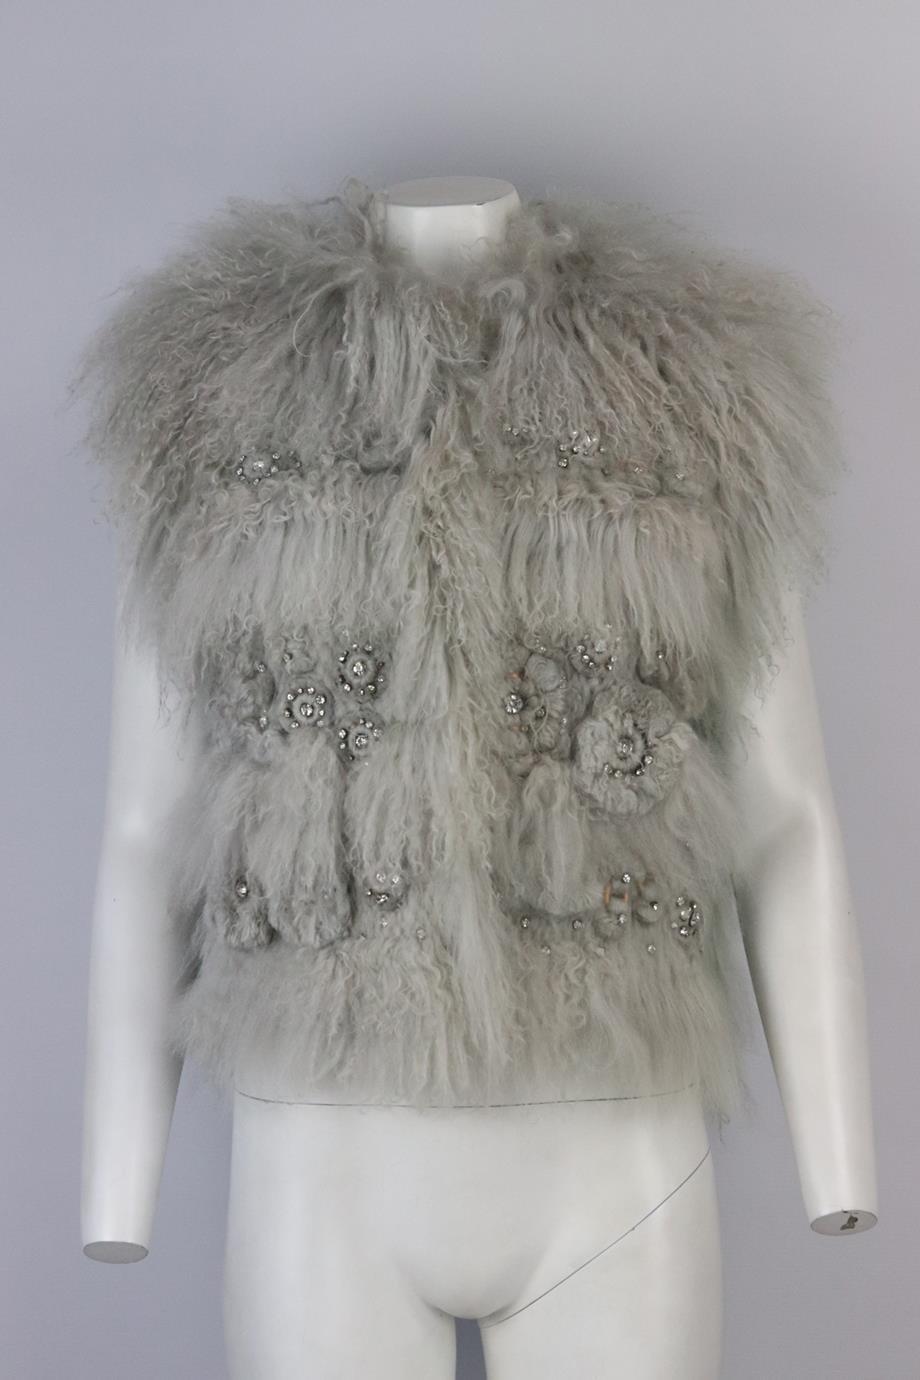 Chloé crystal embellished mongolian shearling gilet. Grey. Sleeveless, crew neck. Hook and eye fastening at the front. 100% Mongolian fur; lining: 70% wool, 30% cashmere. Size: FR 42 (UK 14, US 10, IT 46) Shoulder to shoulder: 16 in. Bust: 40 in.